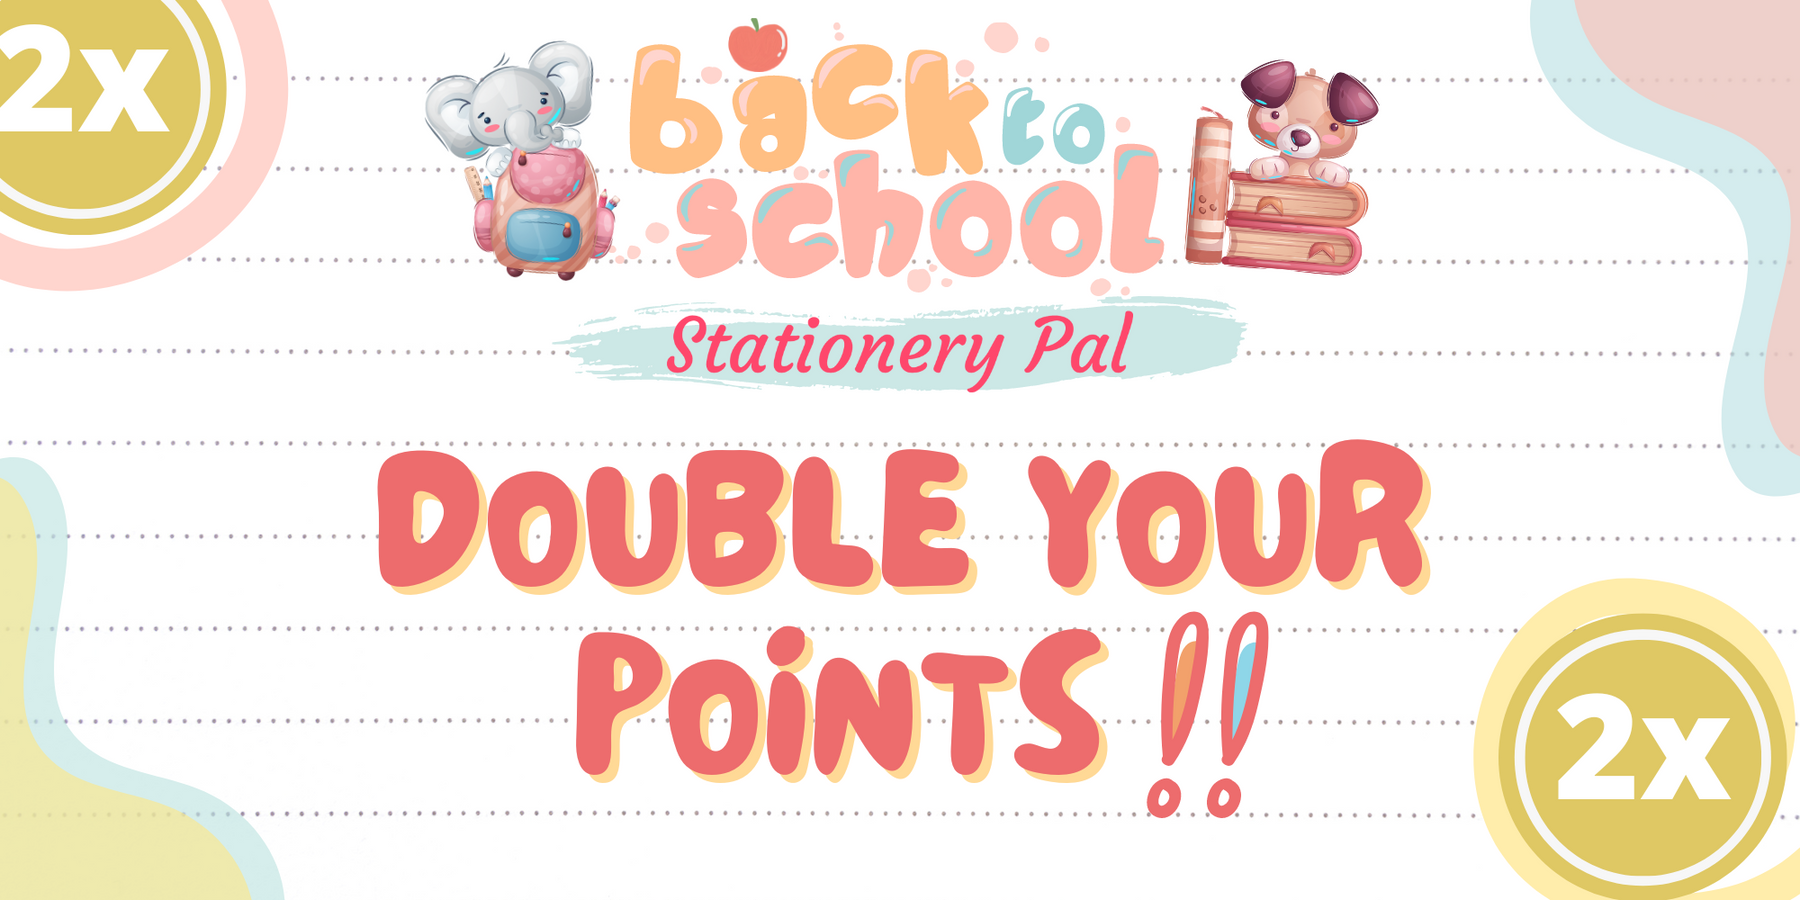 DOUBLE YOUR POINTS!!